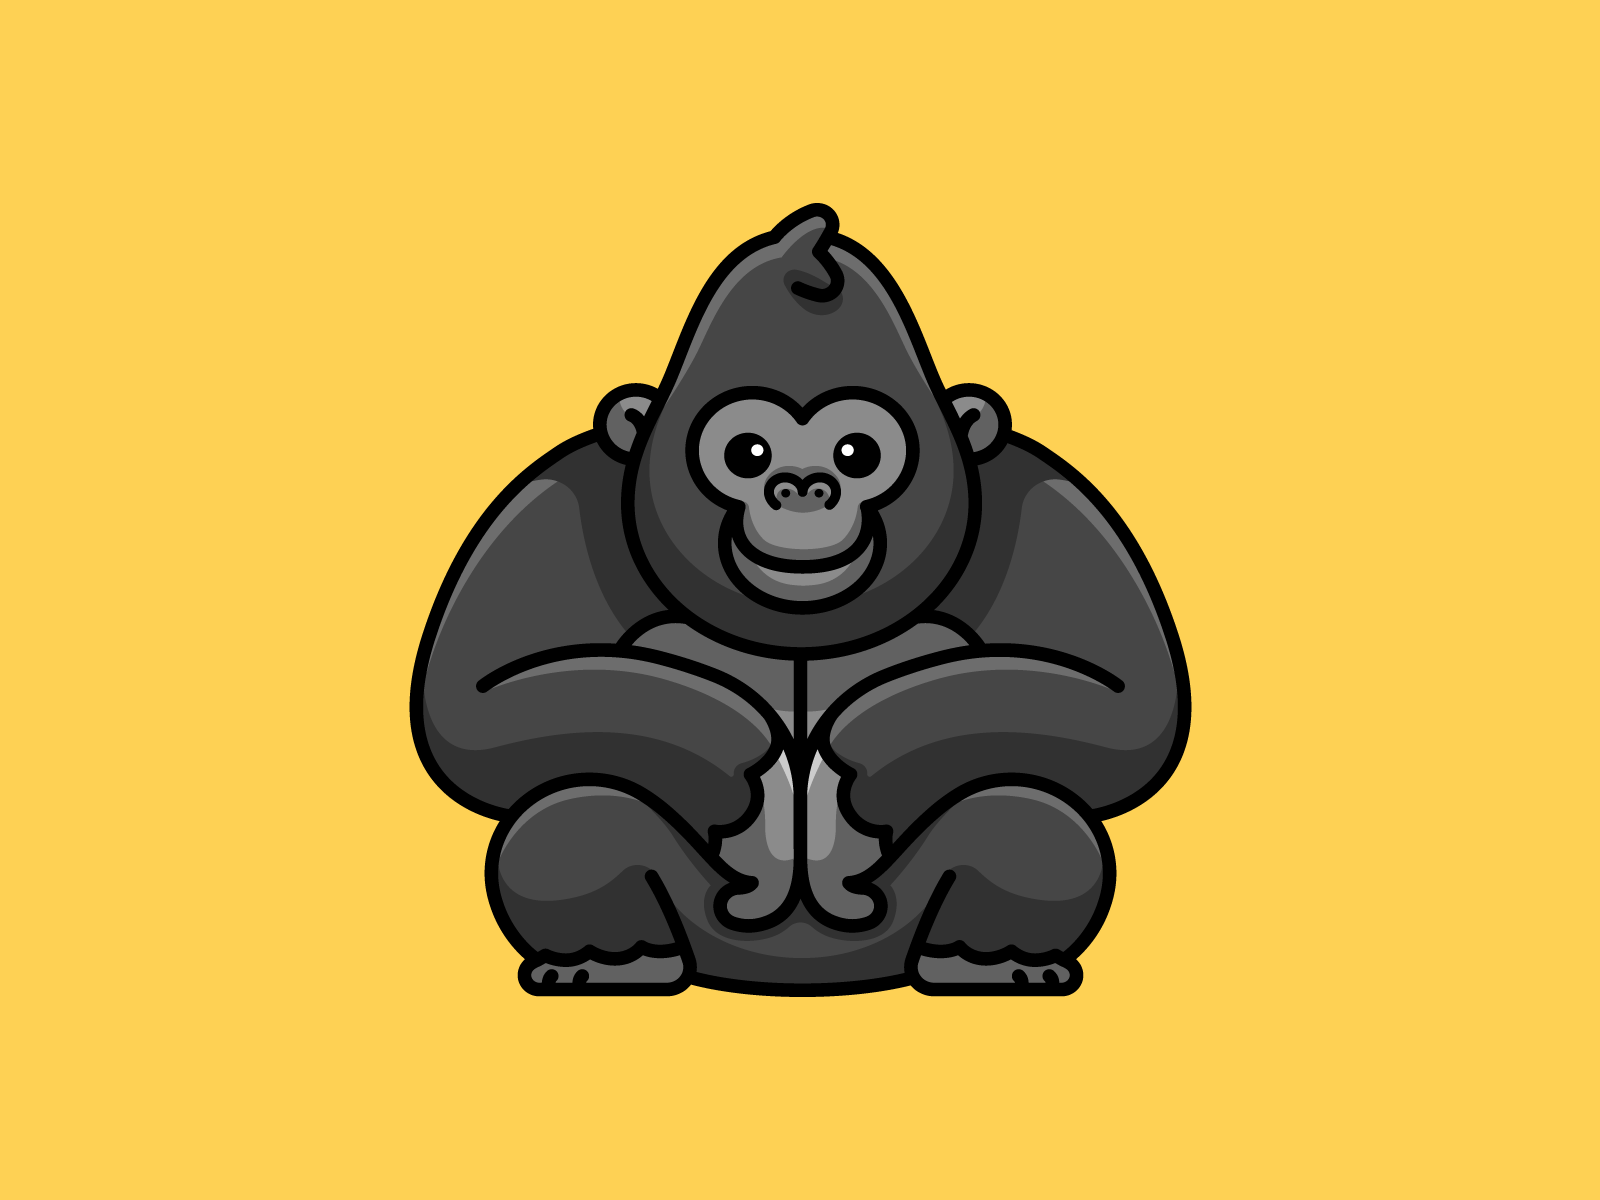 Gorilla mascot character playful cool sticker design symmetry simple illustration happy friendly smiling crouching sitting monkey kingkong ape adorable funny cute gorilla